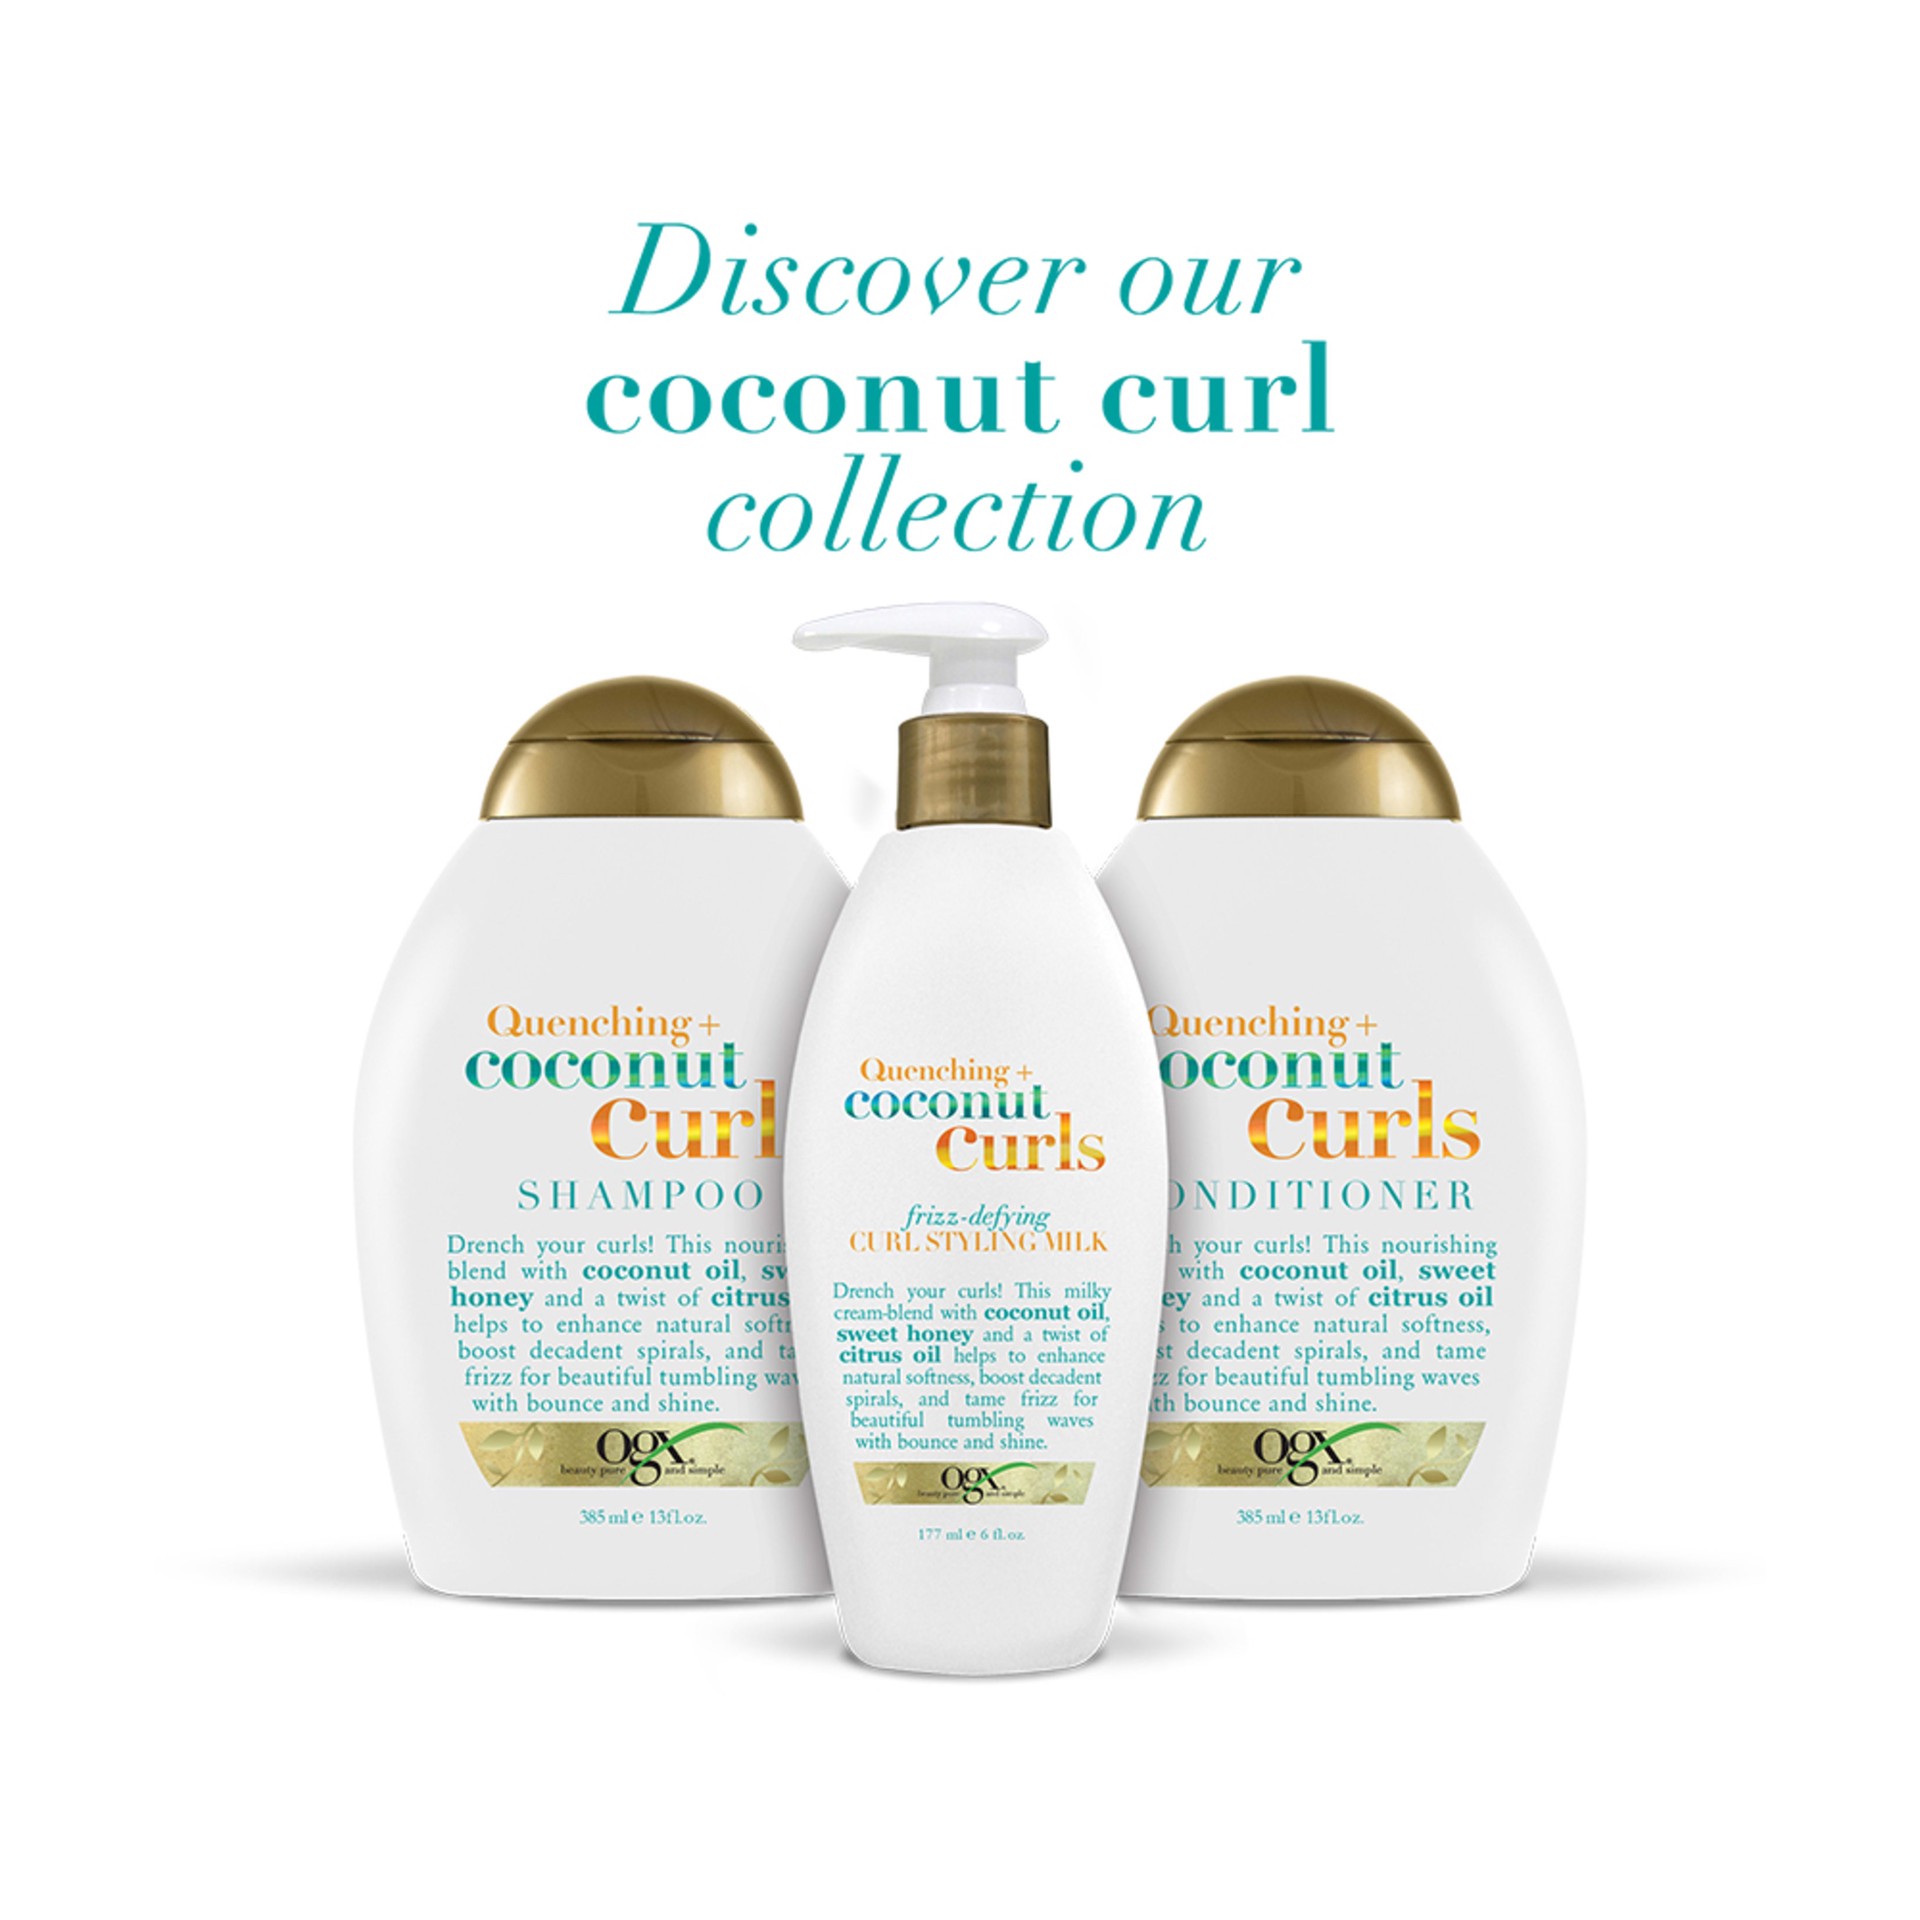 slide 6 of 7, OGX Quenching + Coconut Curls Frizz-Defying Curl Styling Milk, Nourishing Leave-In Hair Treatment with Coconut Oil, Citrus Oil & Honey, Paraben-Free and Sulfated-Surfactants Free, 6 Ounce, 177 ml